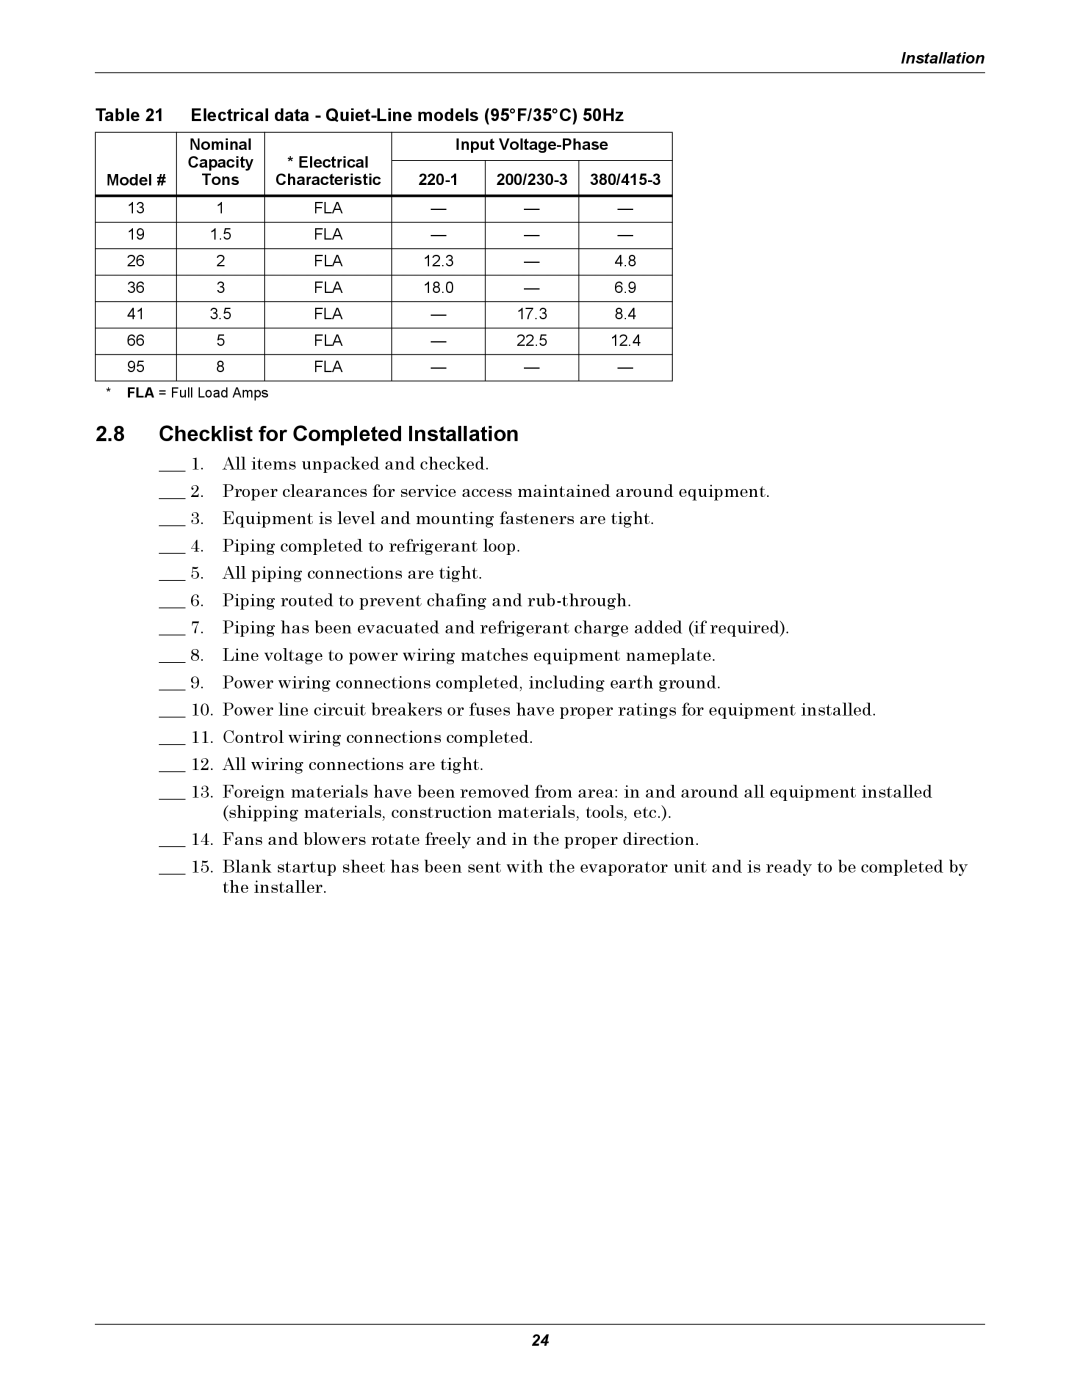 Emerson Figure i manual 2.8Checklist for Completed Installation 